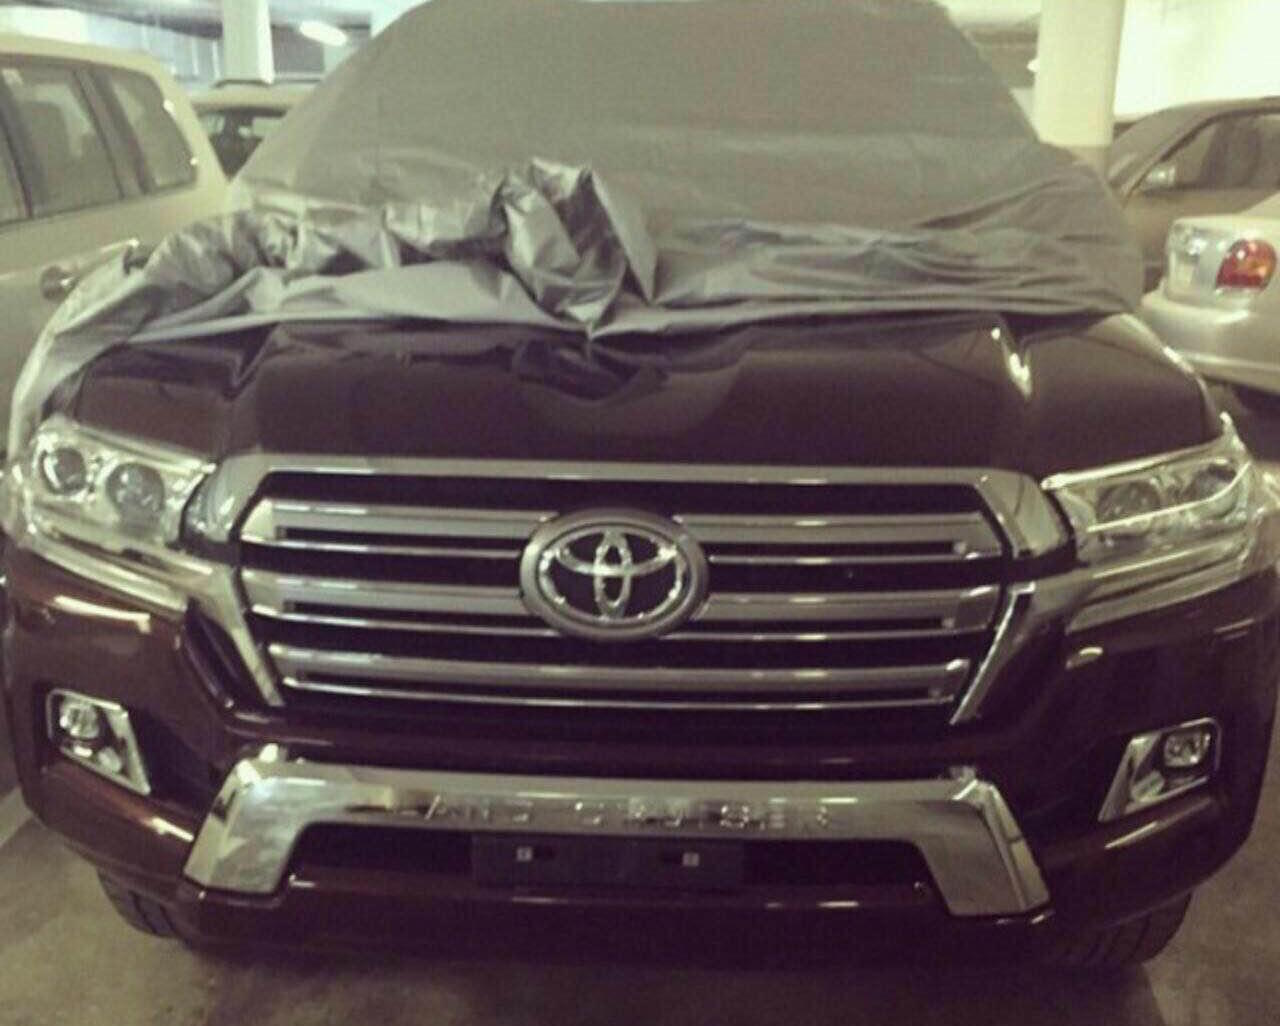 New-look 2016 Toyota LandCruiser front end revealed/confirmed